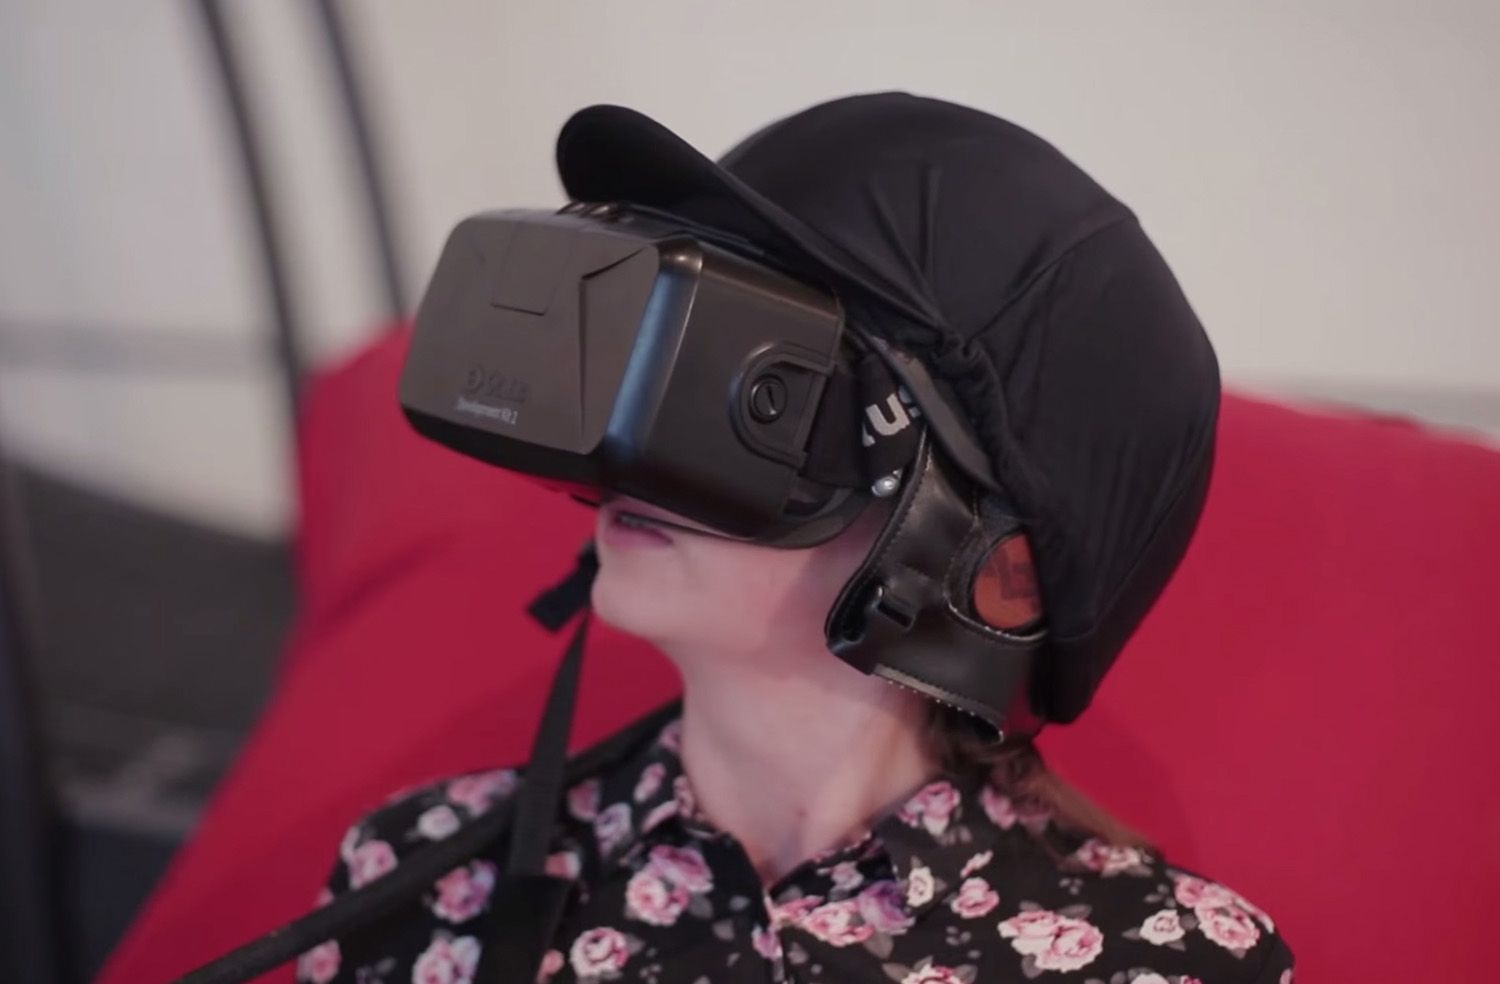 horse racing punters will soon be able to ride the horse they backed live through oculus rift image 1